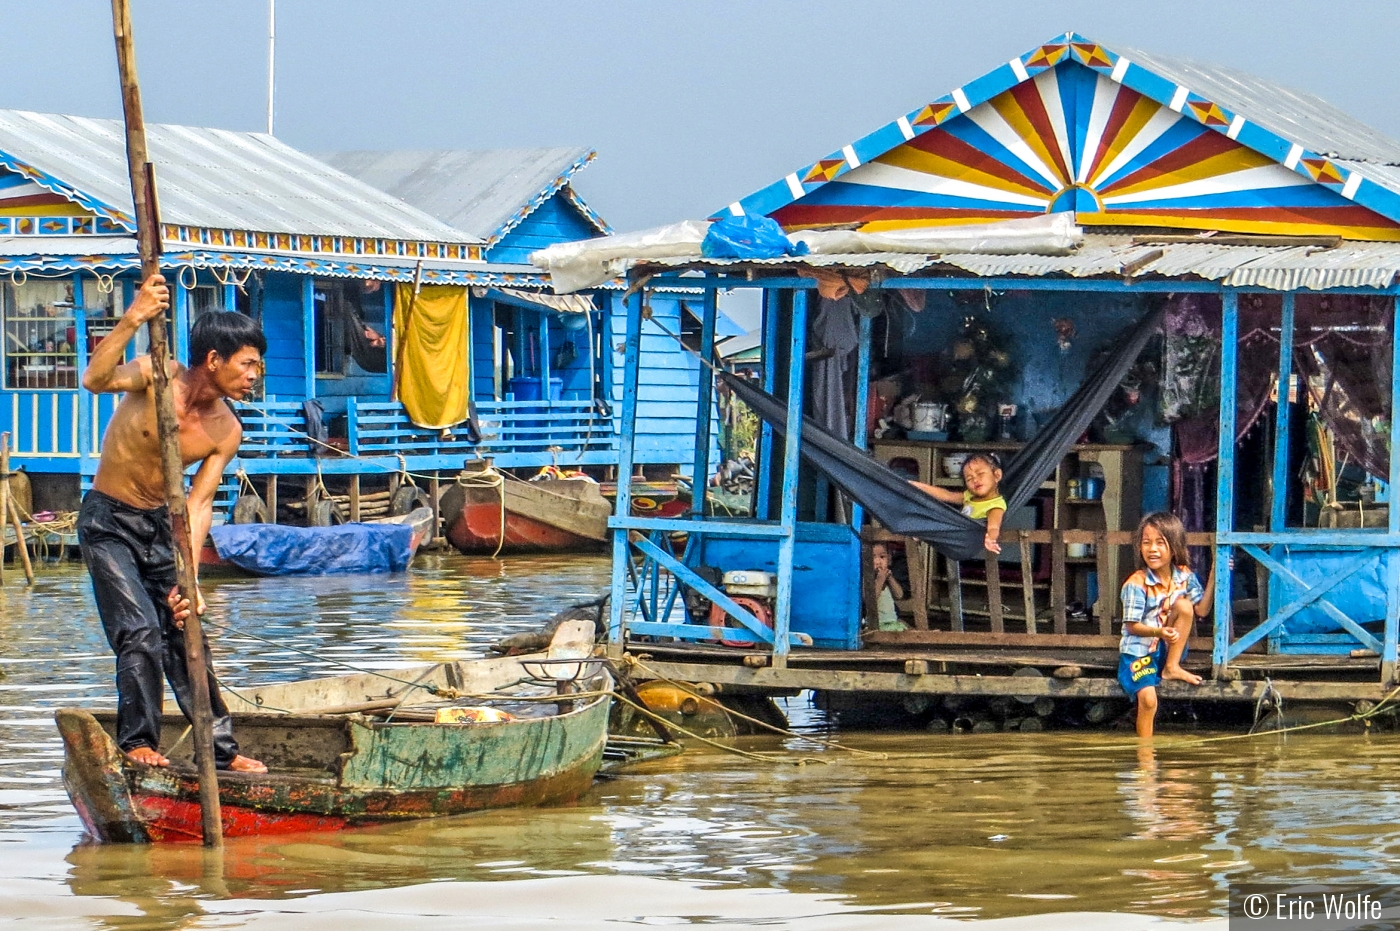 Taunting Child, Cambodian Floating Village by Eric Wolfe